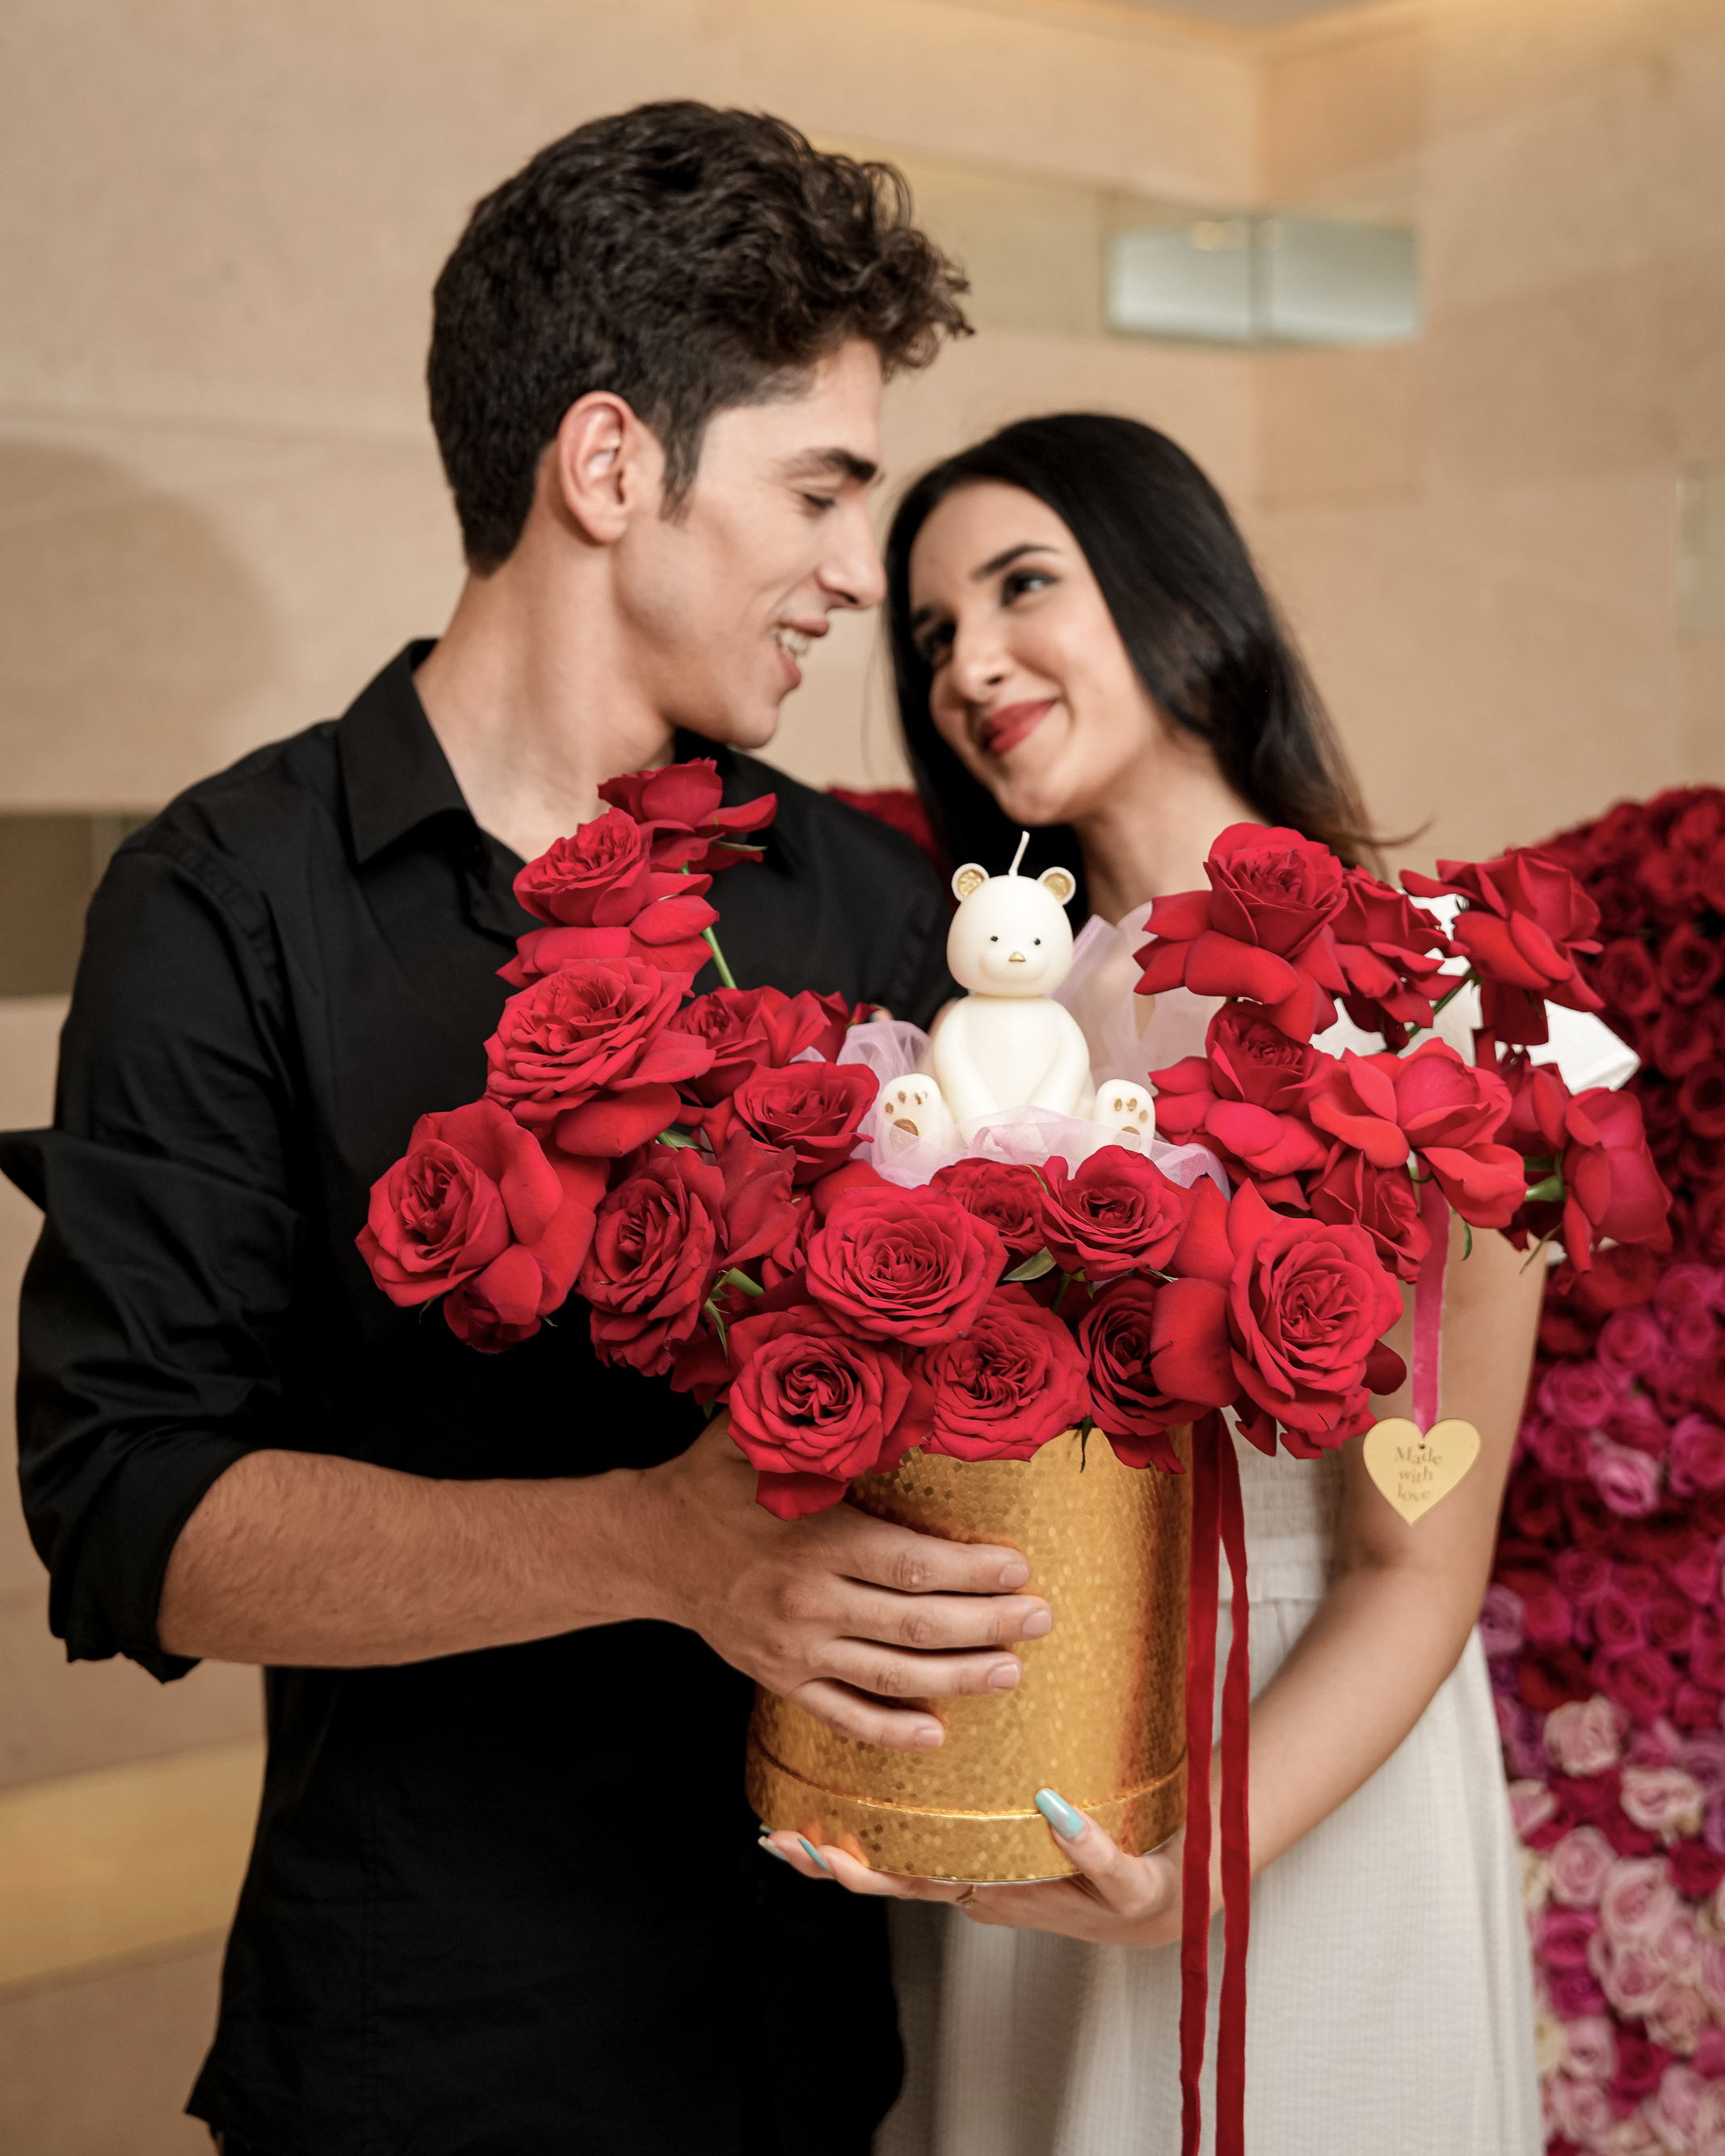 Grand Proposal Flowers